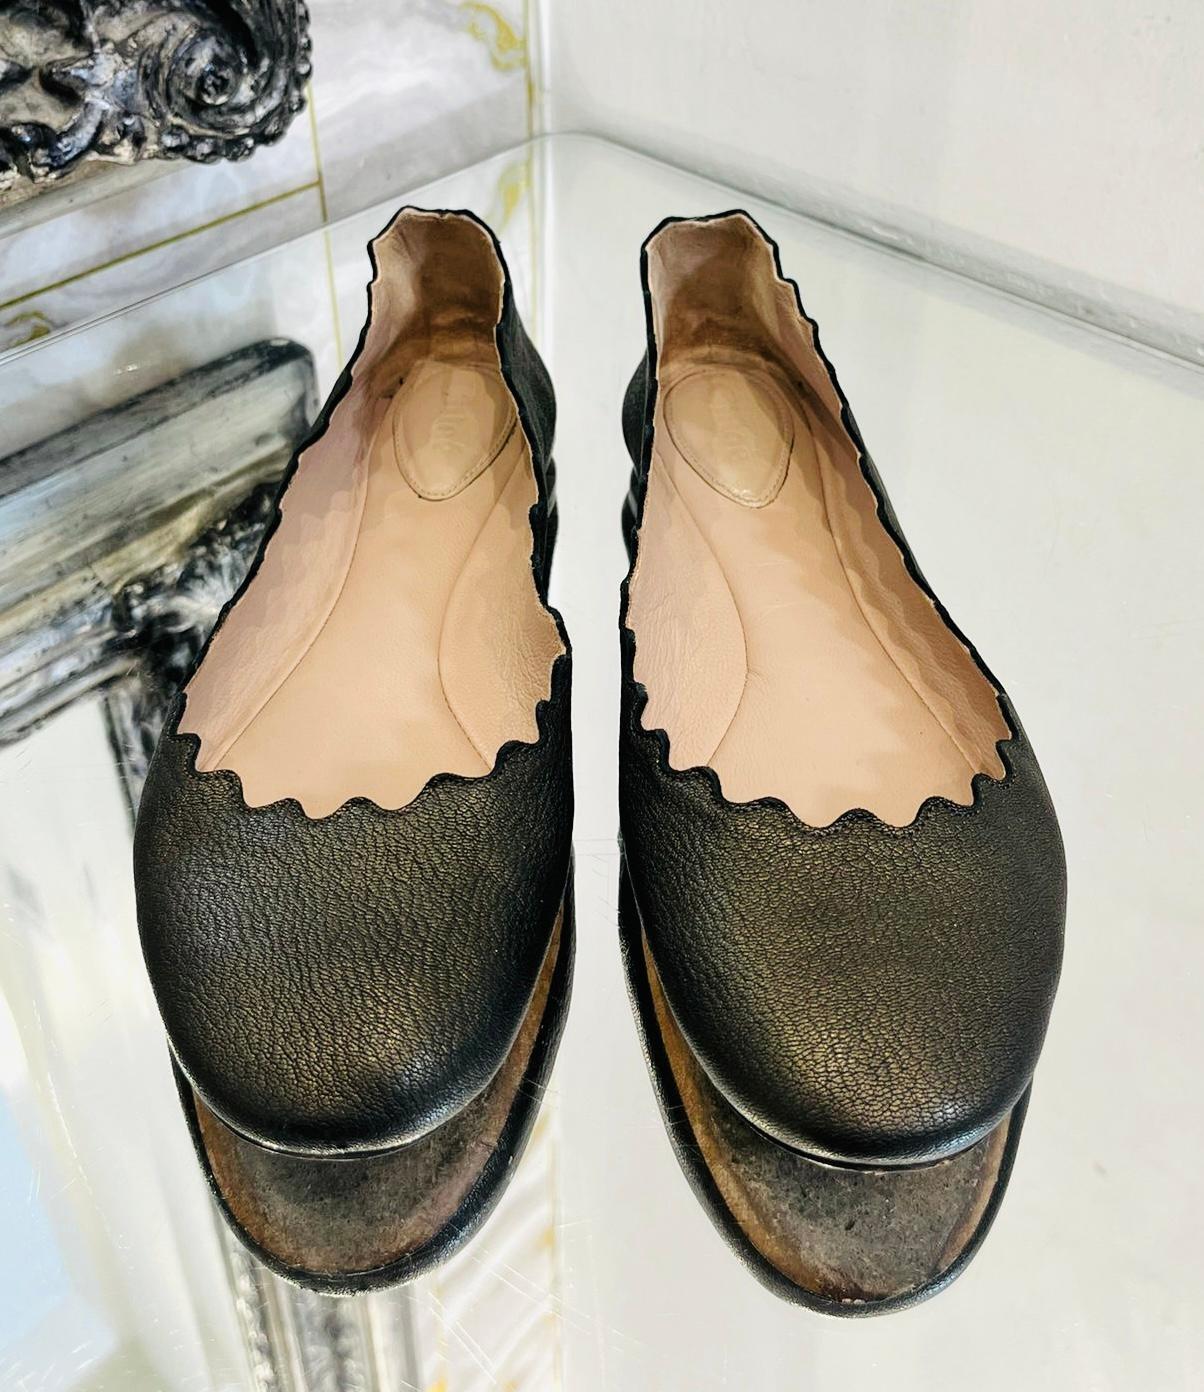 Chloe Leather Ballerina Flats

Black 'Lauren' ballerinas designed with scalloped trim.

Featuring almond toe, short heel and leather insoles and soles. Rrp £420

Size – 37

Condition – Good/Very Good (Small, general signs of wear, minor scratches to